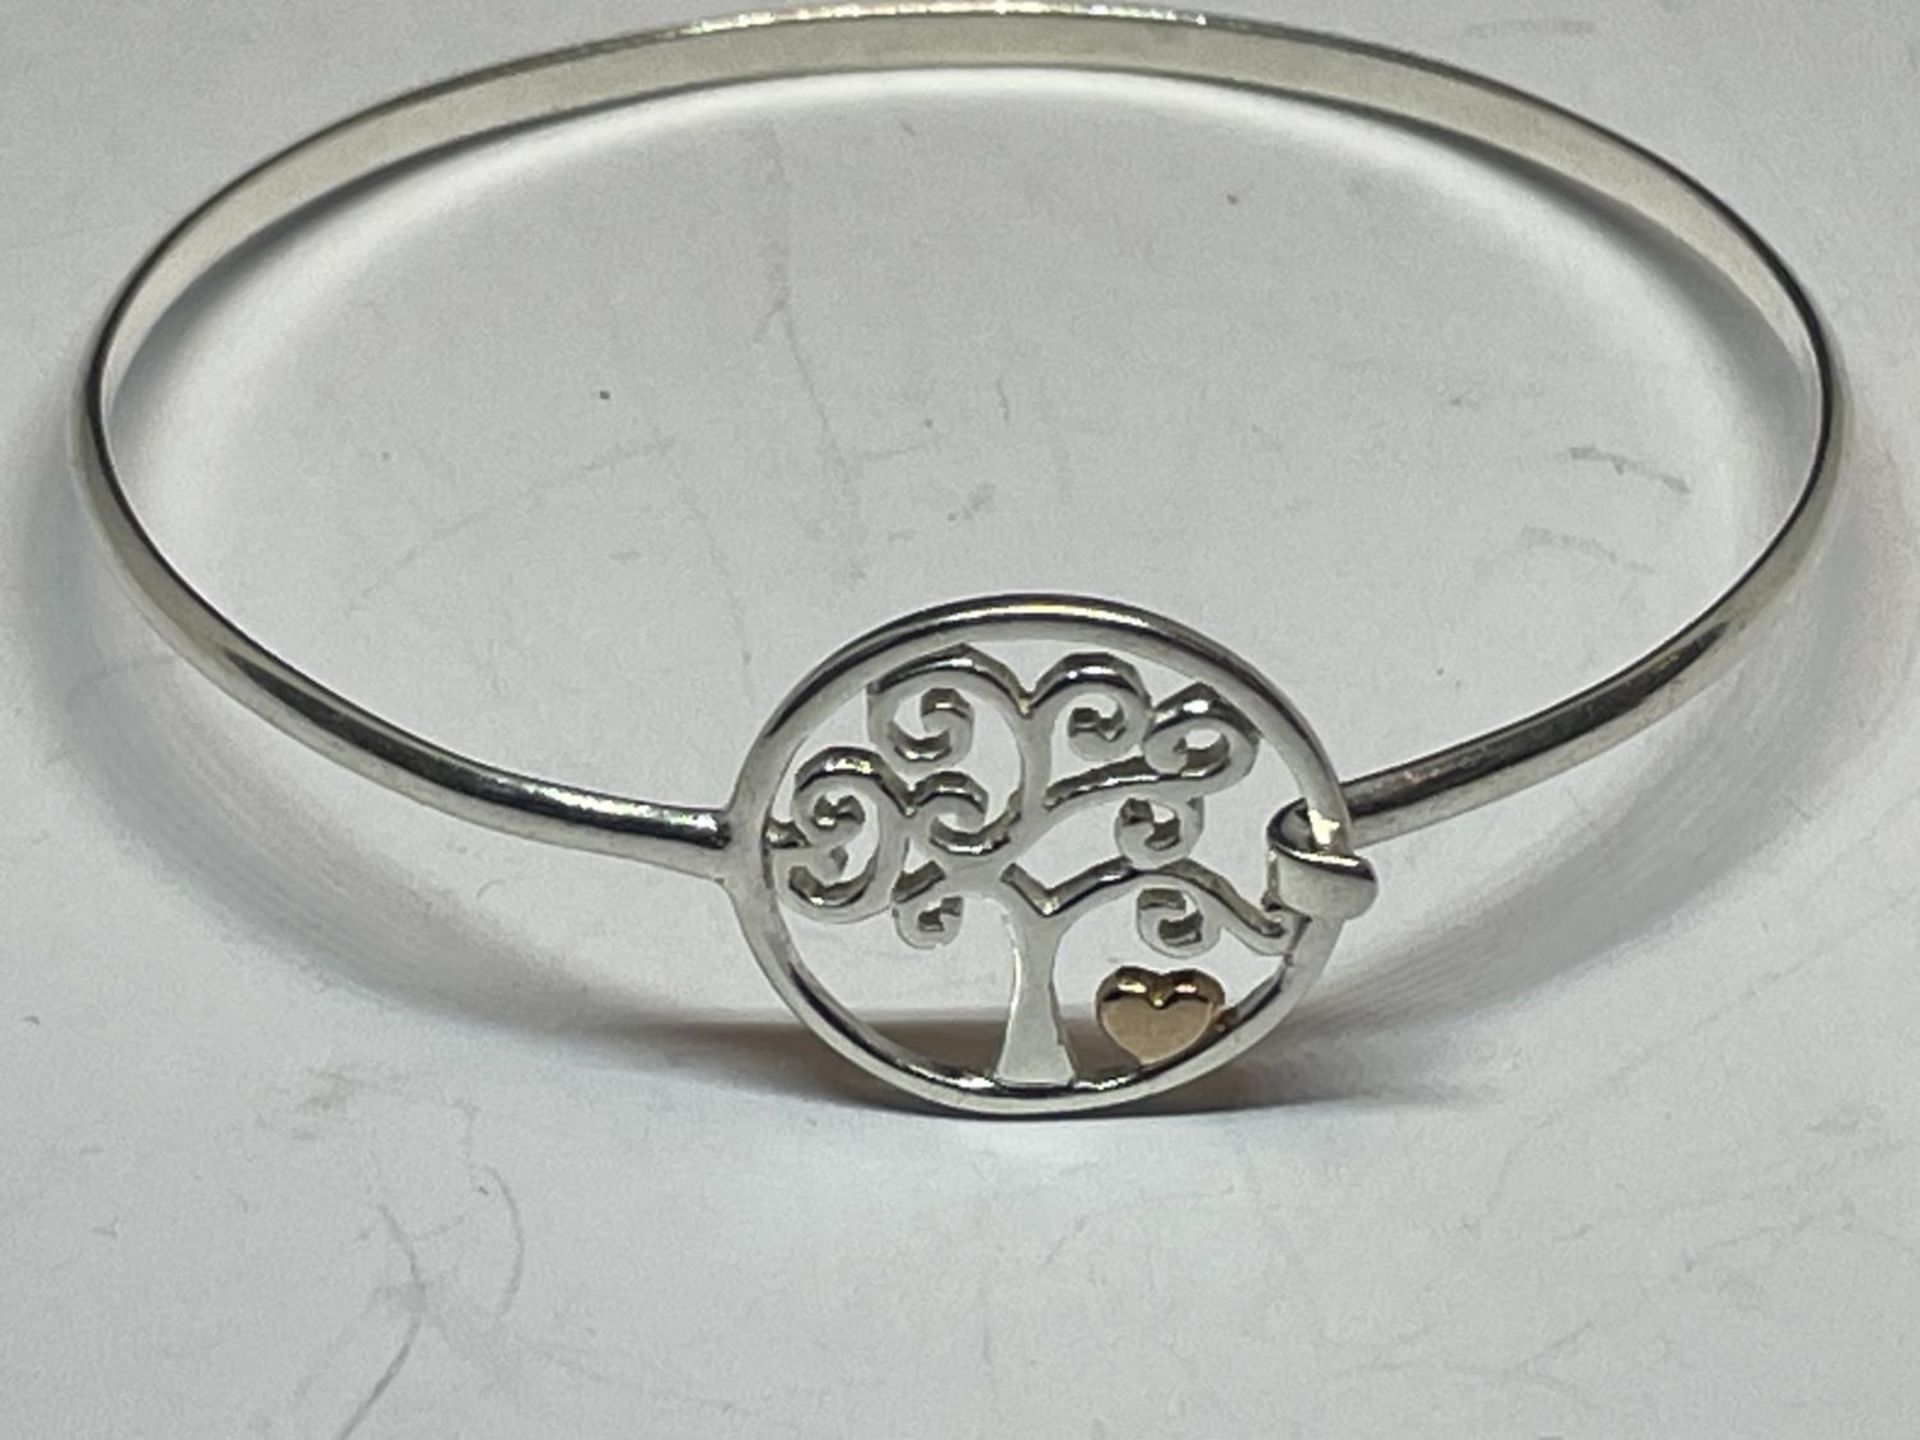 TWO SILVER BANGLES - Image 3 of 3